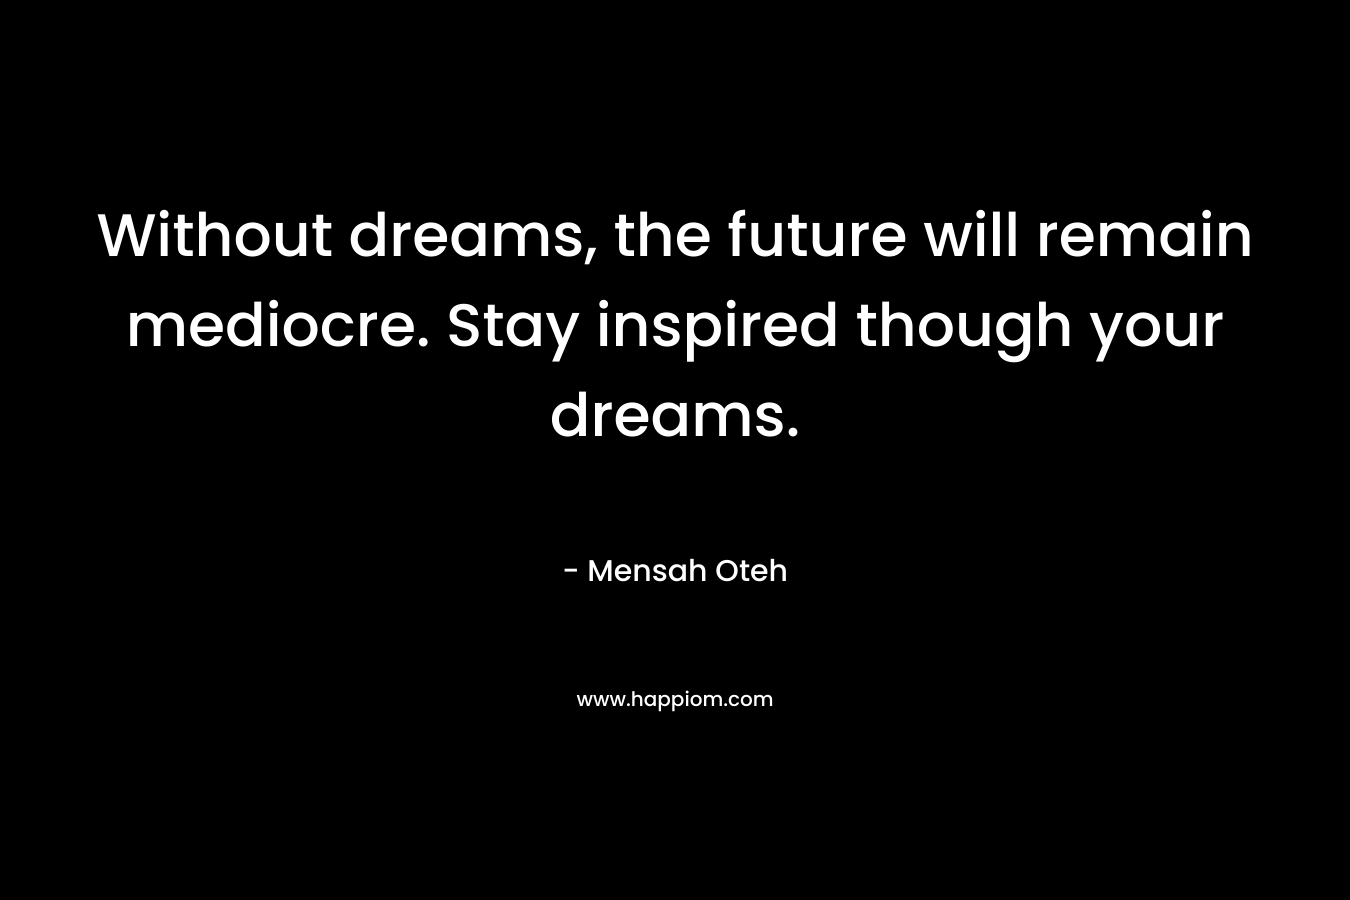 Without dreams, the future will remain mediocre. Stay inspired though your dreams.